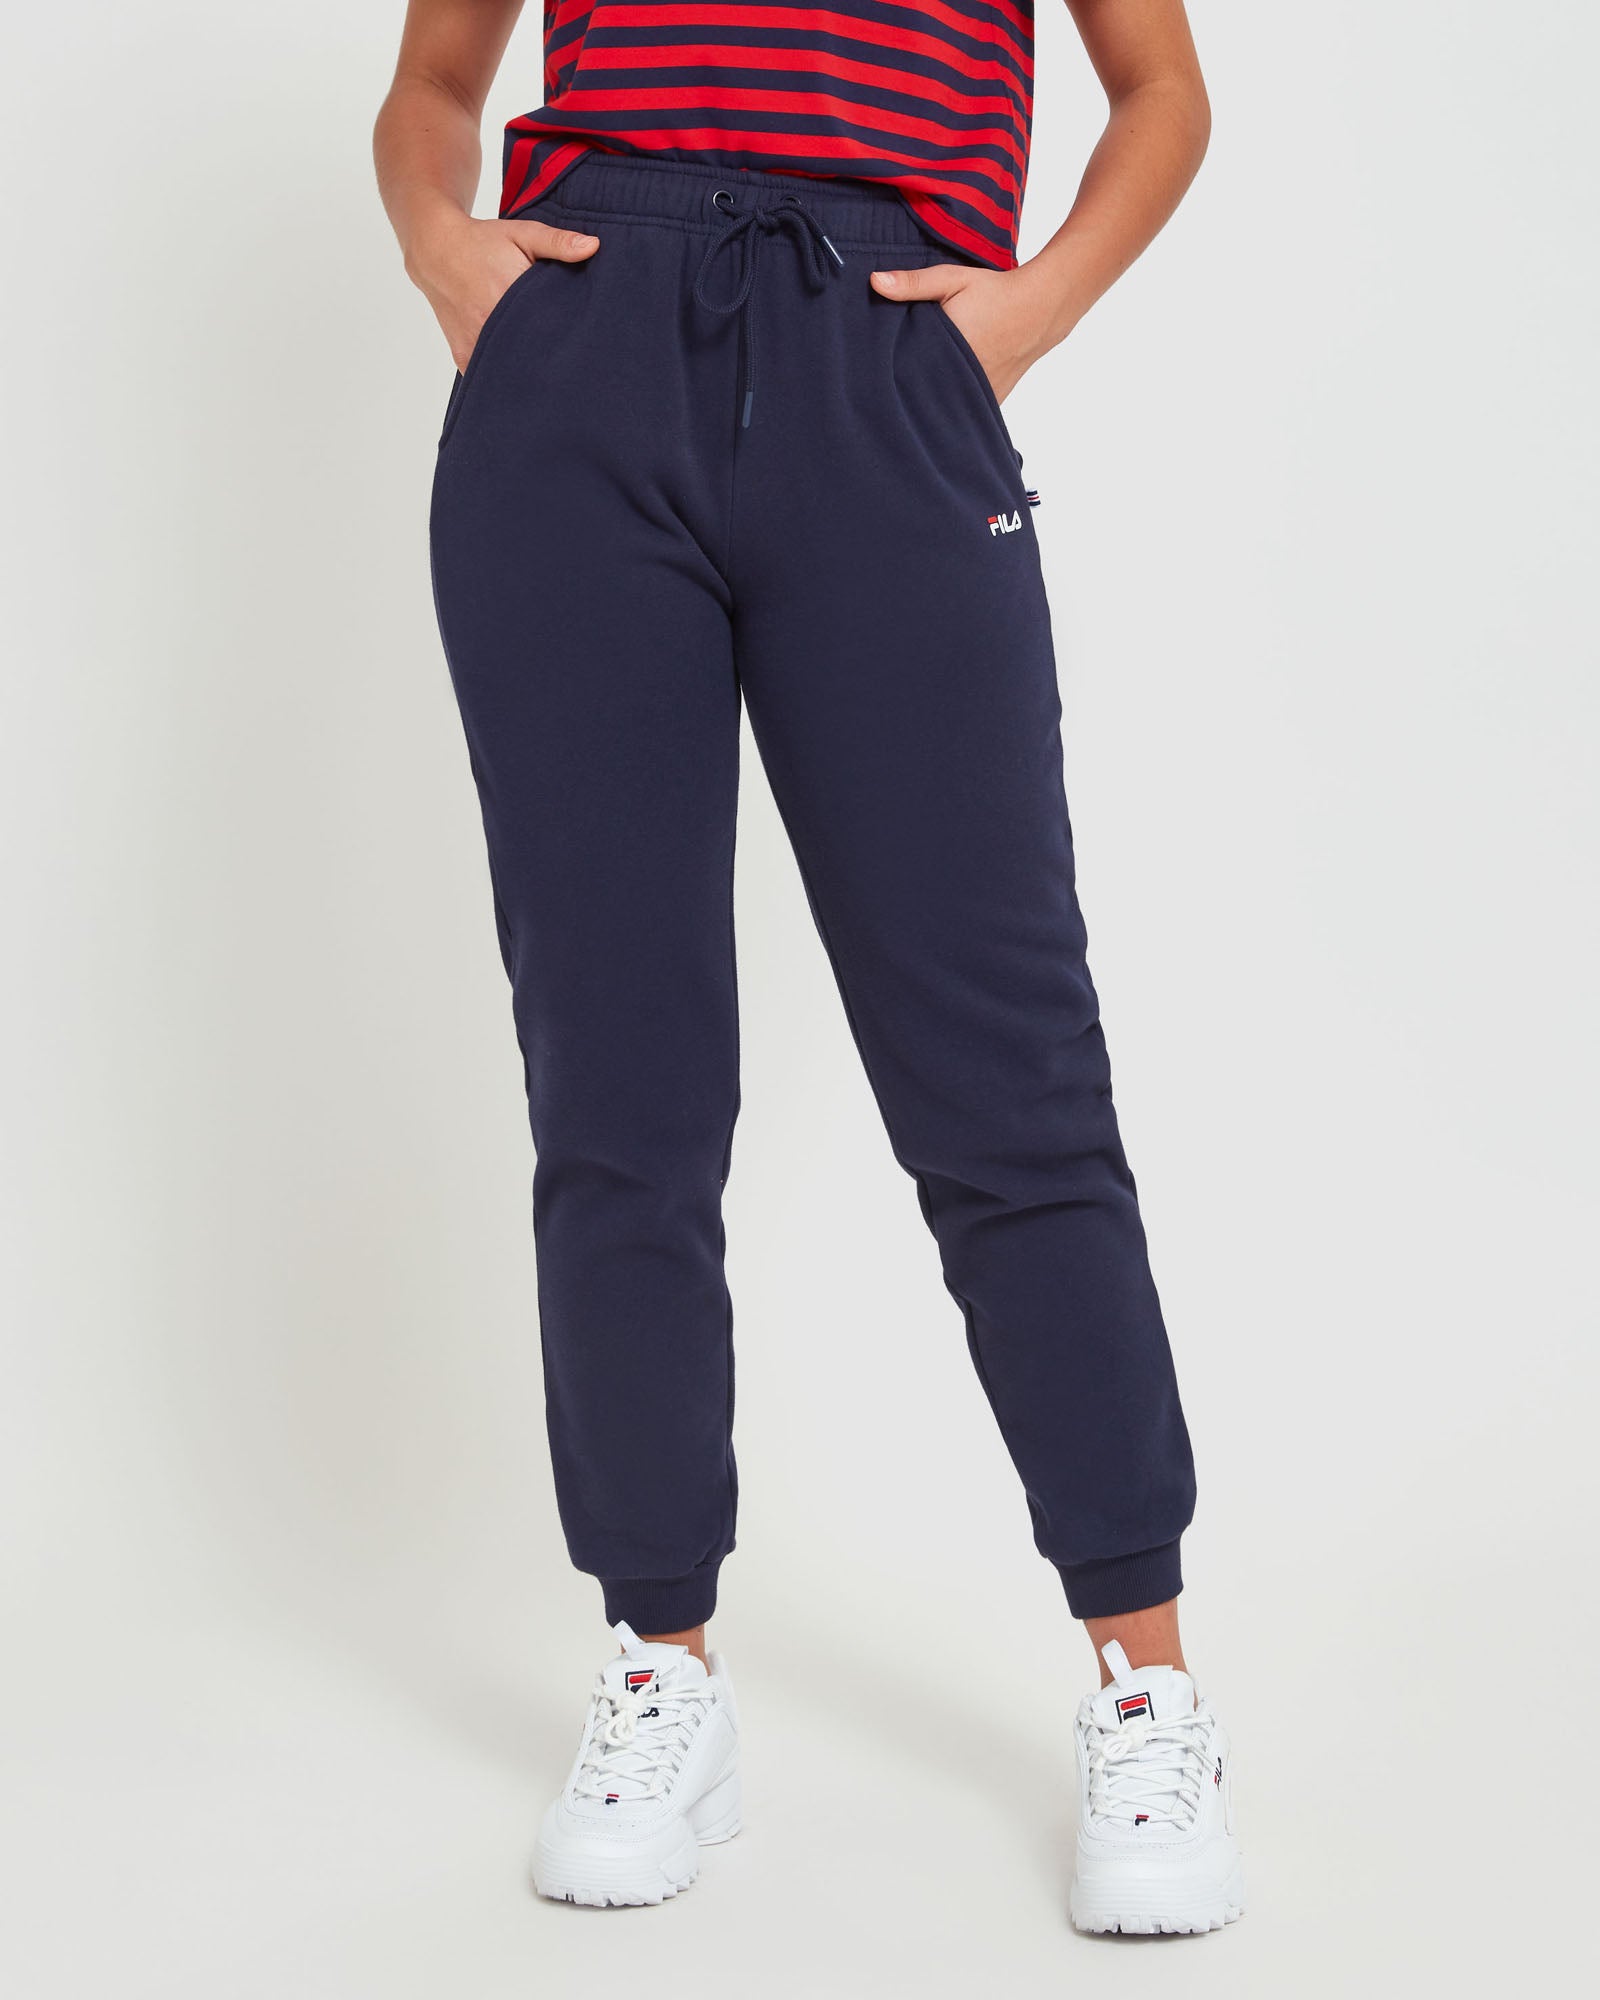 Best Selling Shopify Products on fila.com.au-2